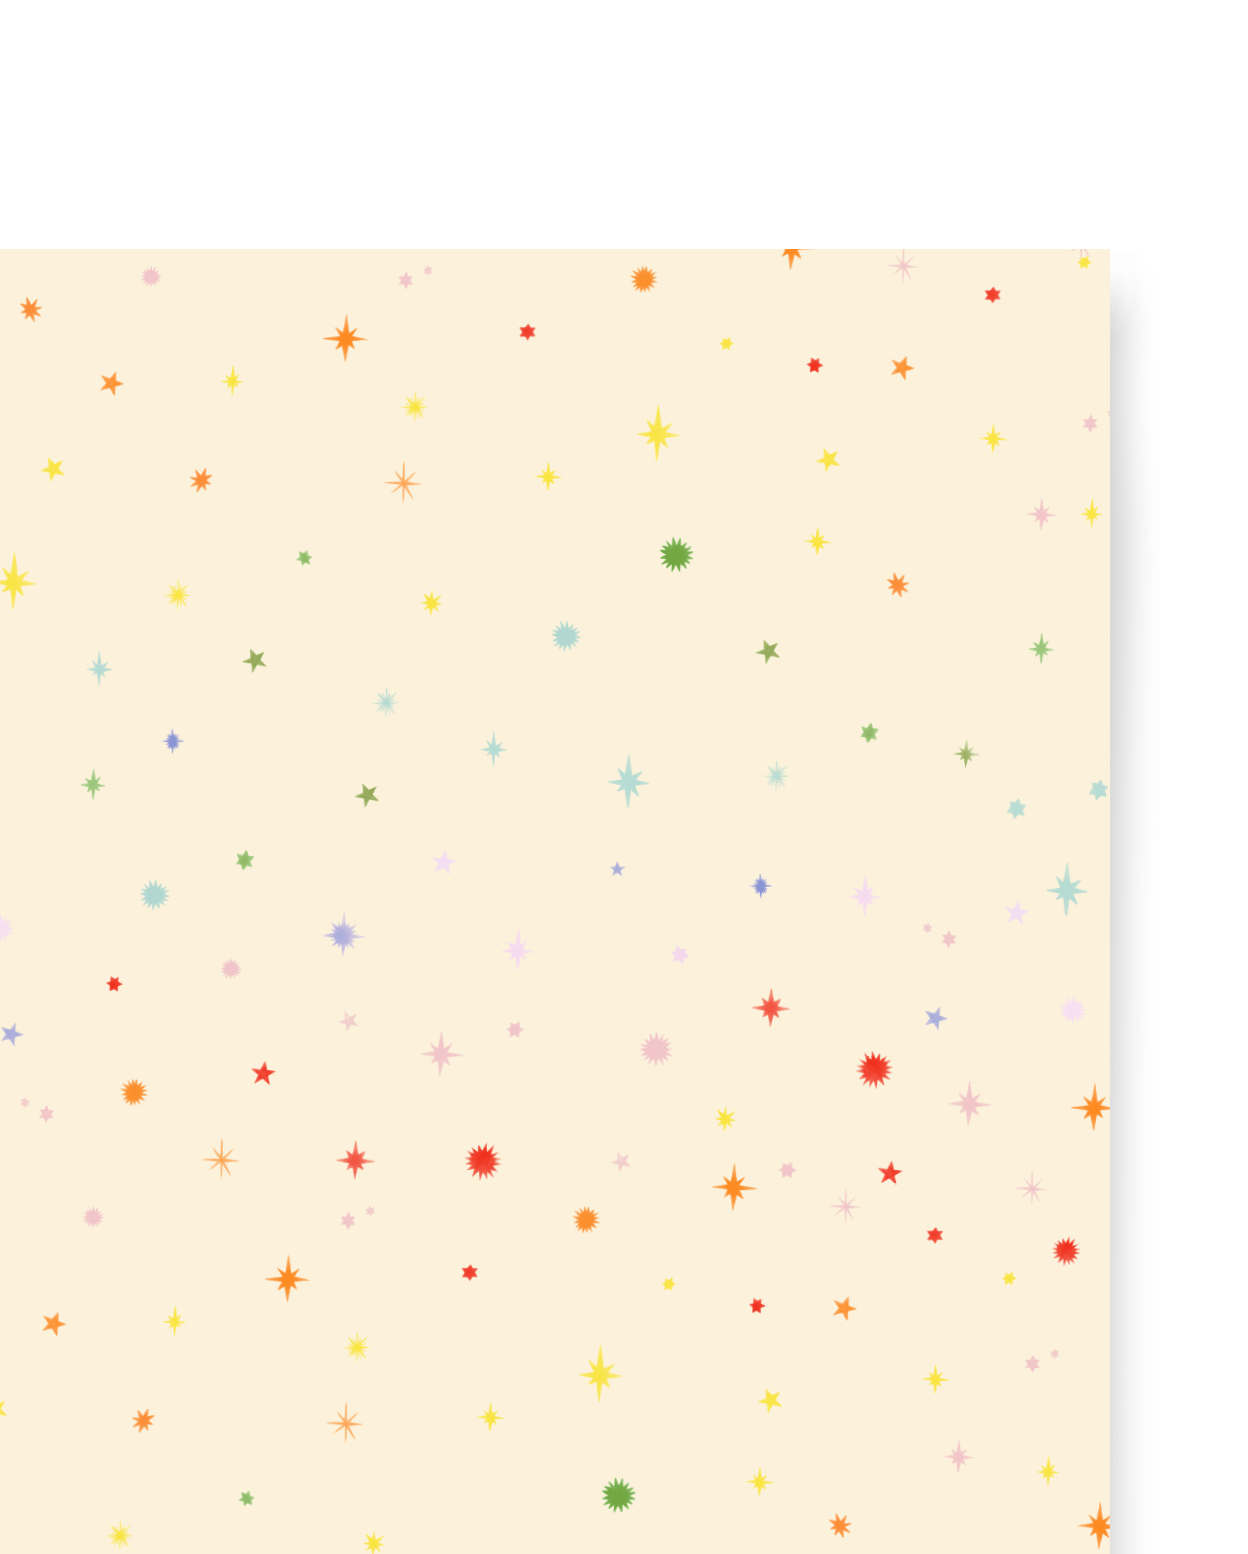 Rainbow colored stars of various shapes and sizes printed on a cream background.